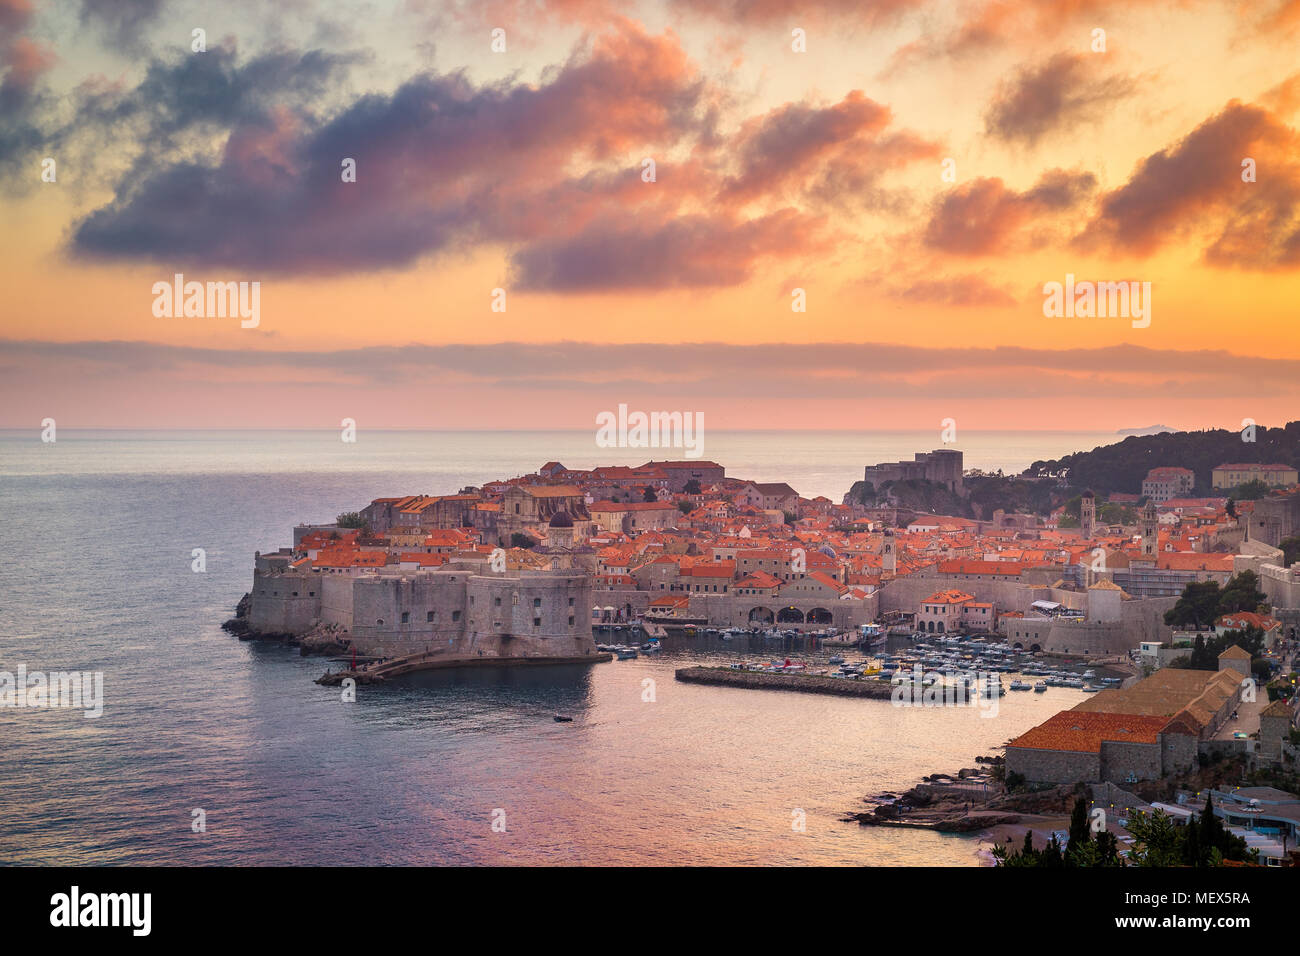 Panoramic aerial view of the historic town of Dubrovnik, one of the most famous tourist destinations in the Mediterranean Sea, at sunset, Croatia Stock Photo